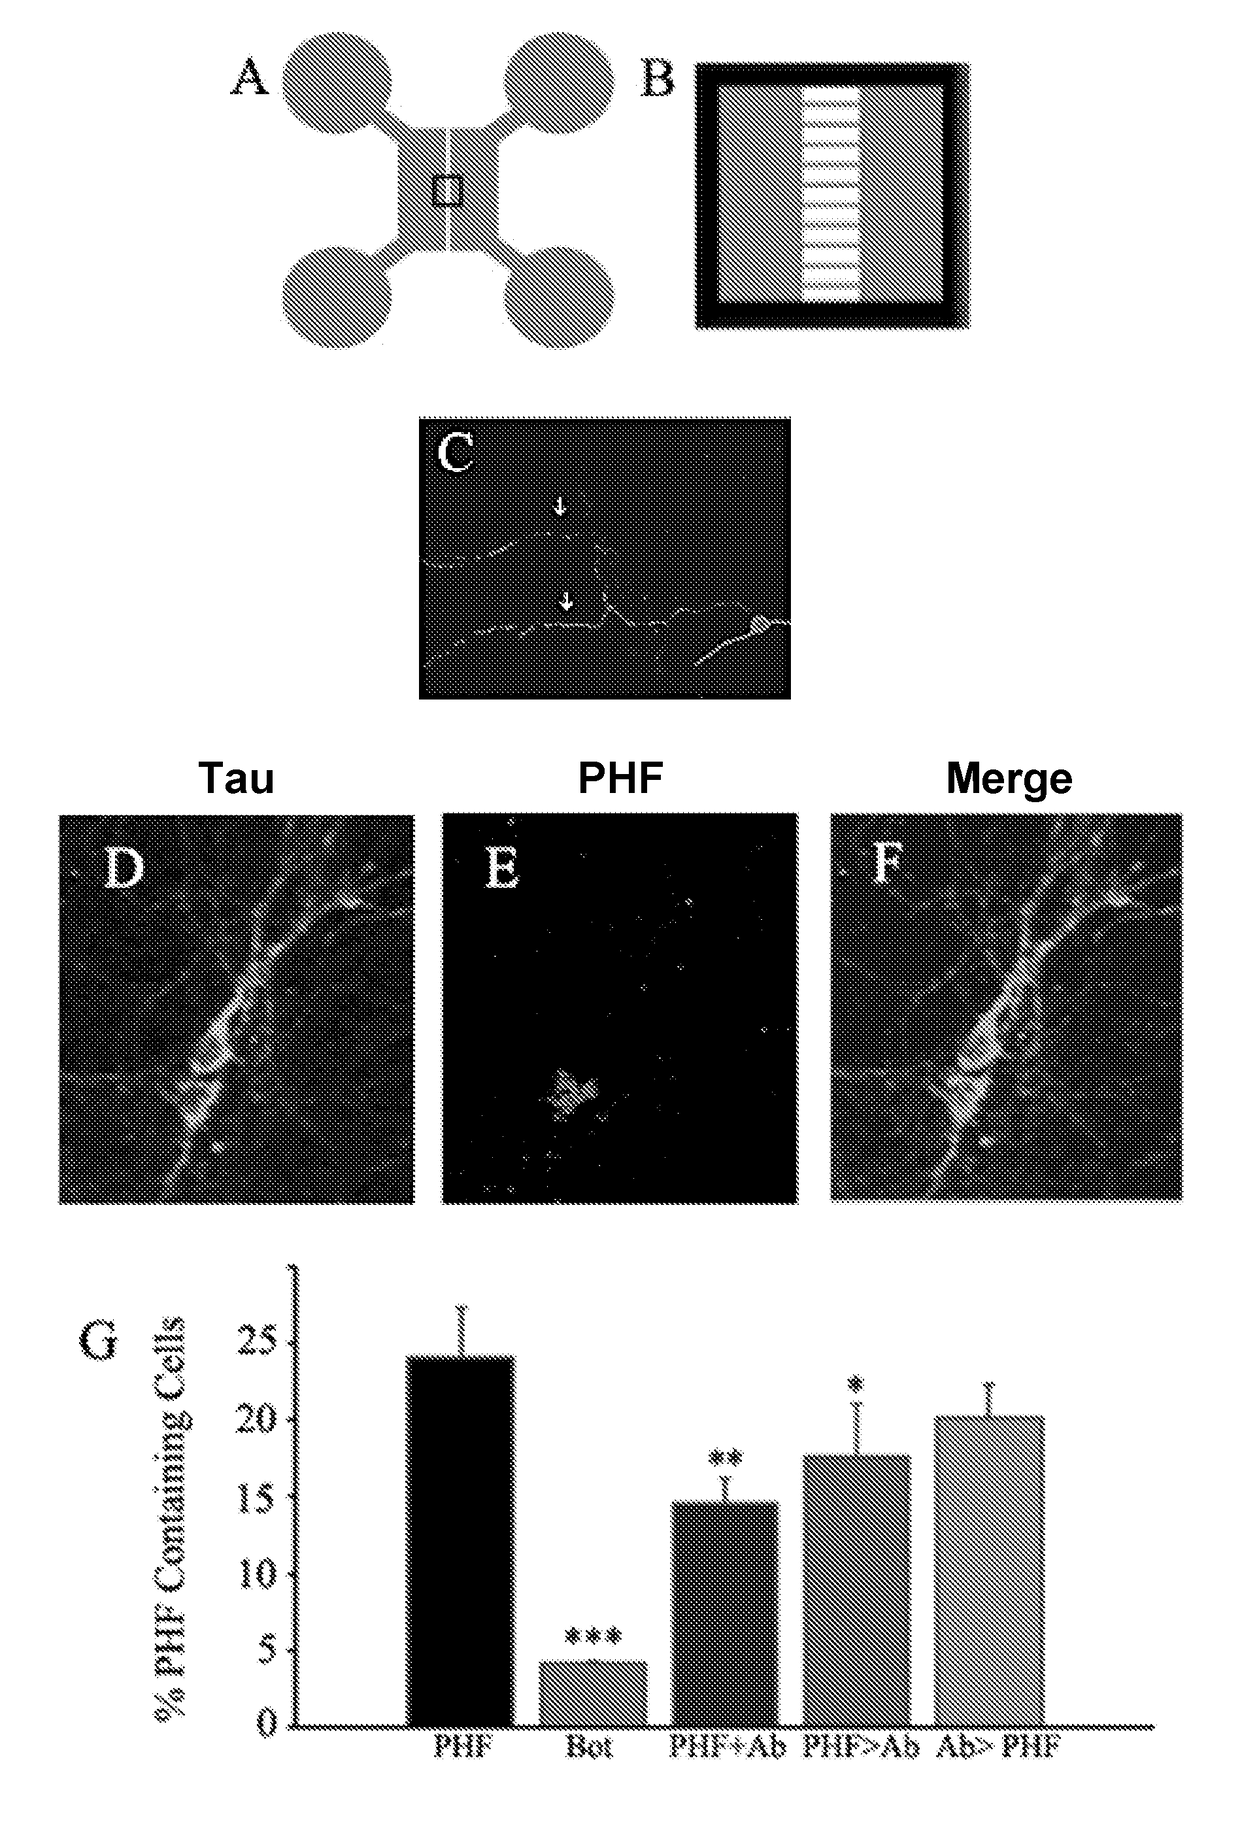 Antibody-Based Molecules Selective for the {P}Ser404 Epitope of Tau and Their Uses in the Diagnosis and Treatment of Tauopathy